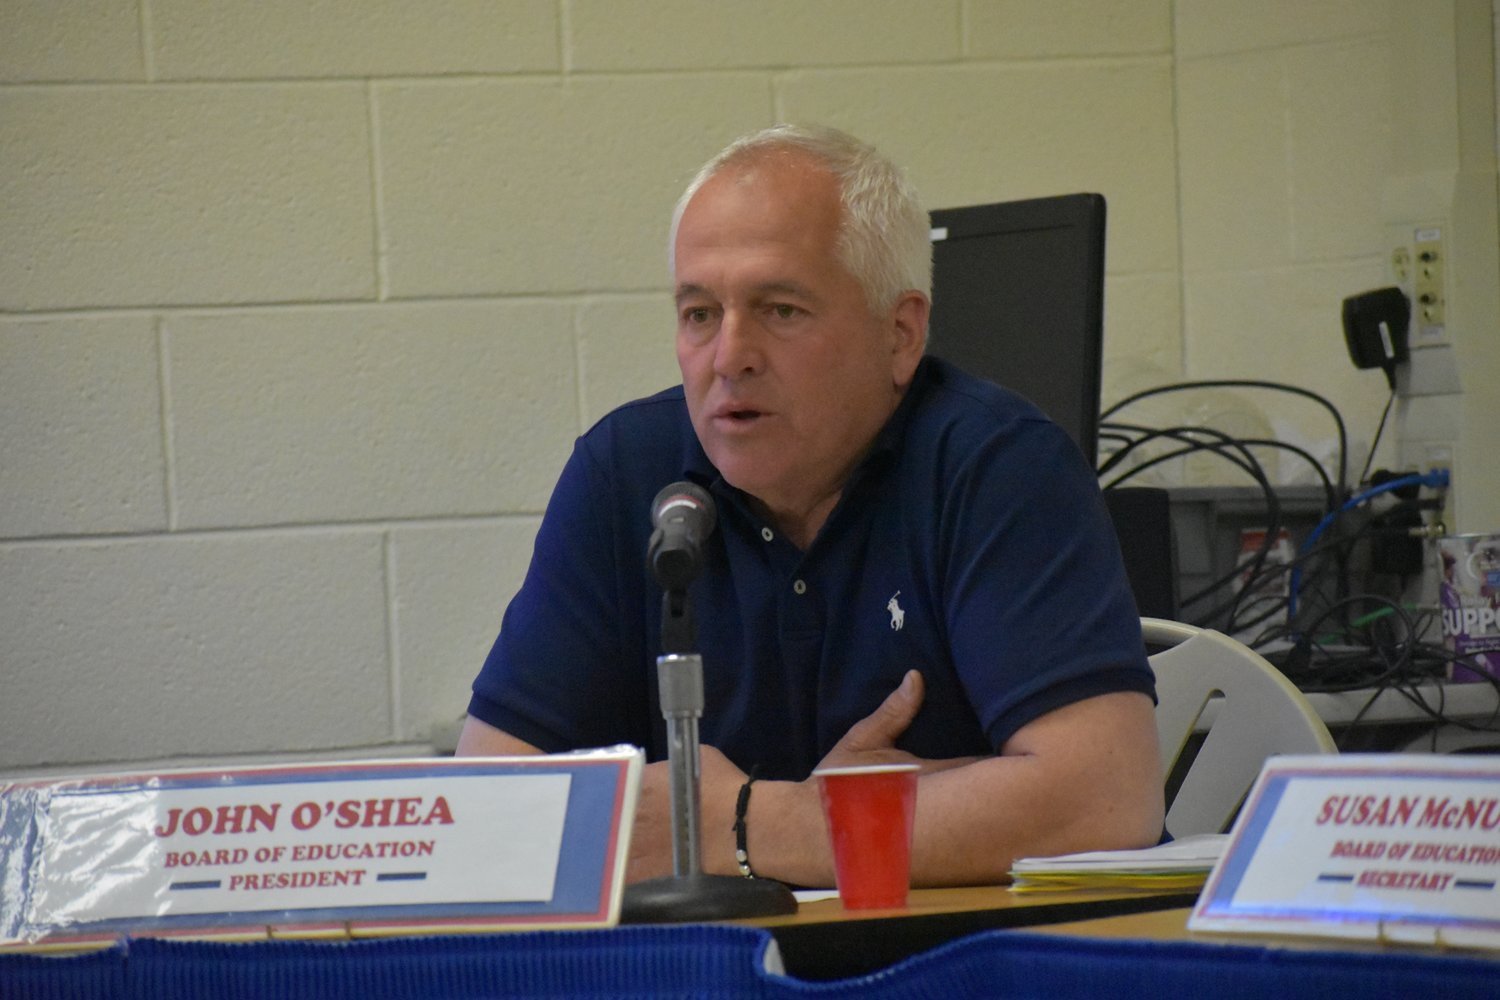 Board of Education President John O’Shea said he planned to address criticisms levied on the board by Rockville Centre Teachers’ Association President Frank Van Zant at the upcoming Nov. 16 meeting.